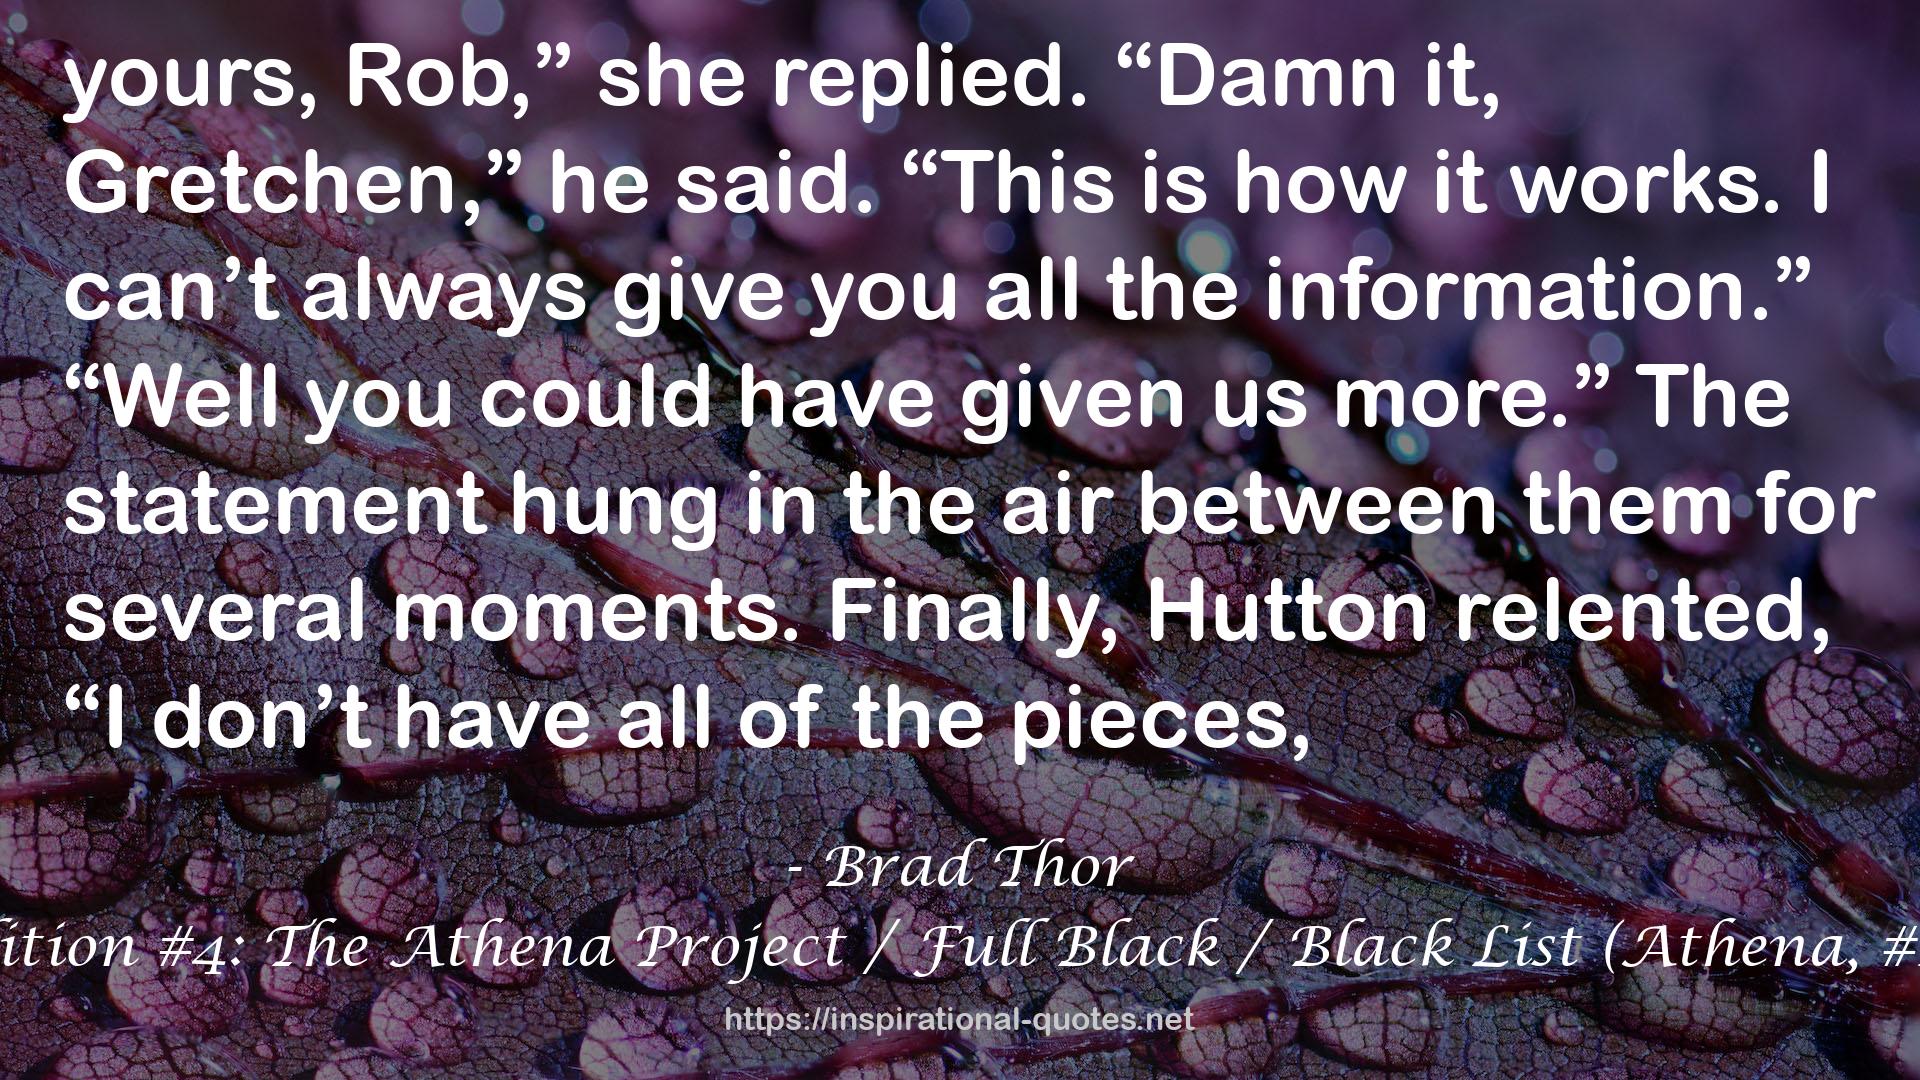 Brad Thor Collectors' Edition #4: The Athena Project / Full Black / Black List (Athena, #1, Scot Harvath, #10, #11) QUOTES